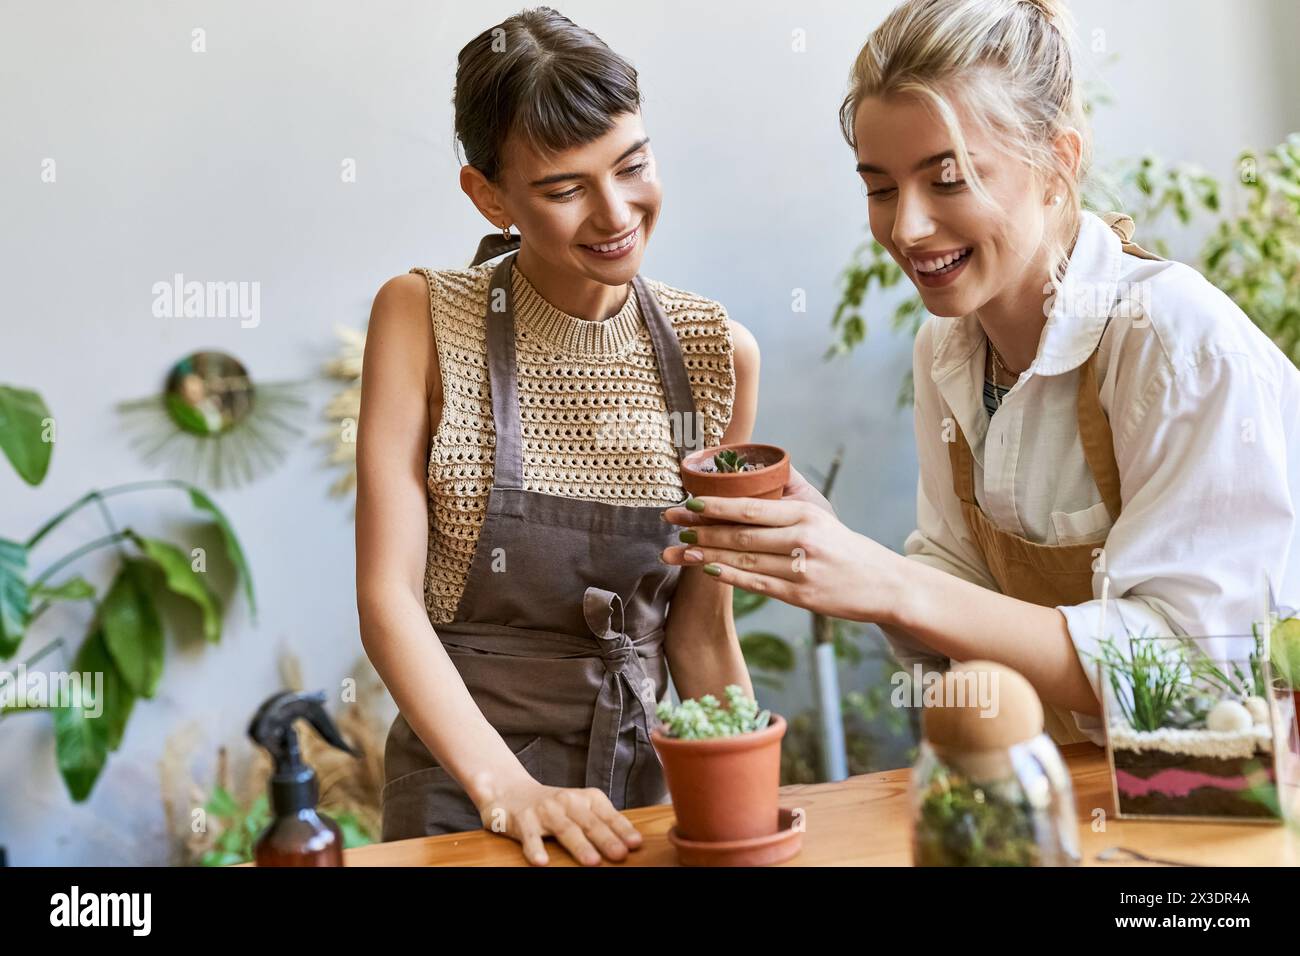 Two women admiring a potted plant with love and curiosity. Stock Photo